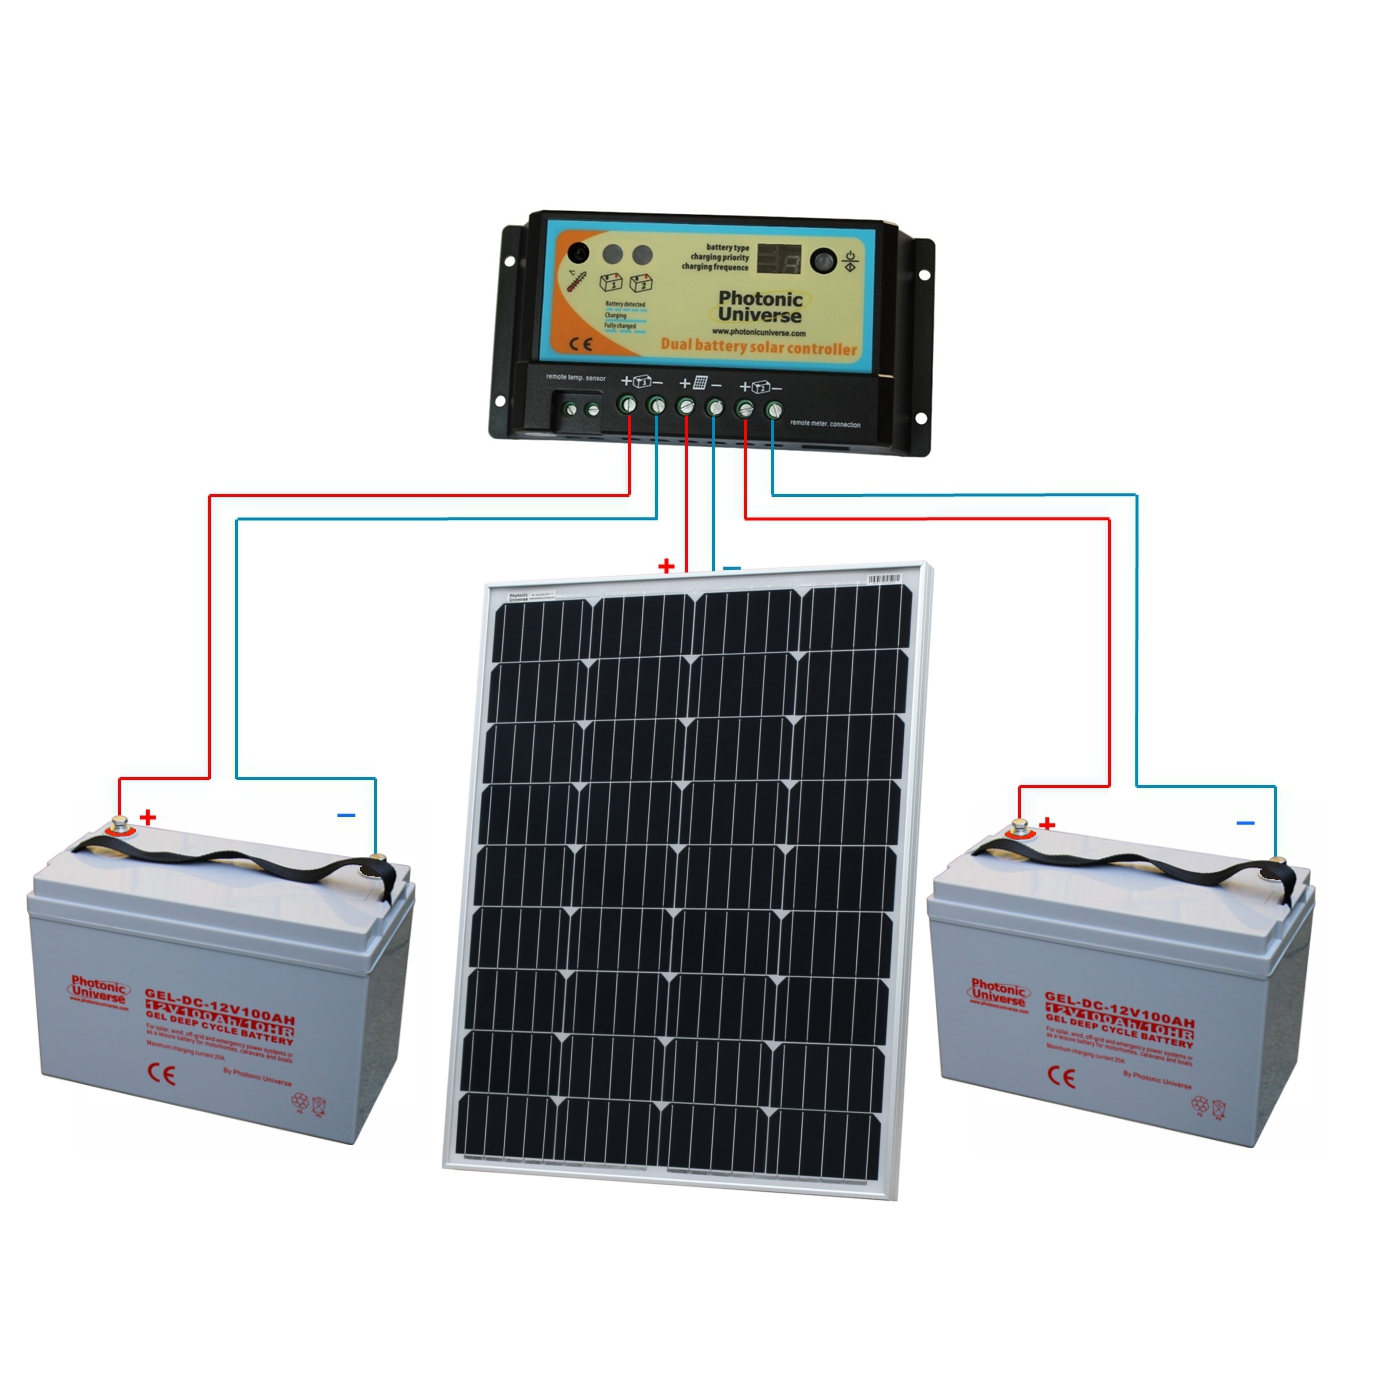 Connection diagram for 100W 12V  Photonic Universe dual battery solar charging kit